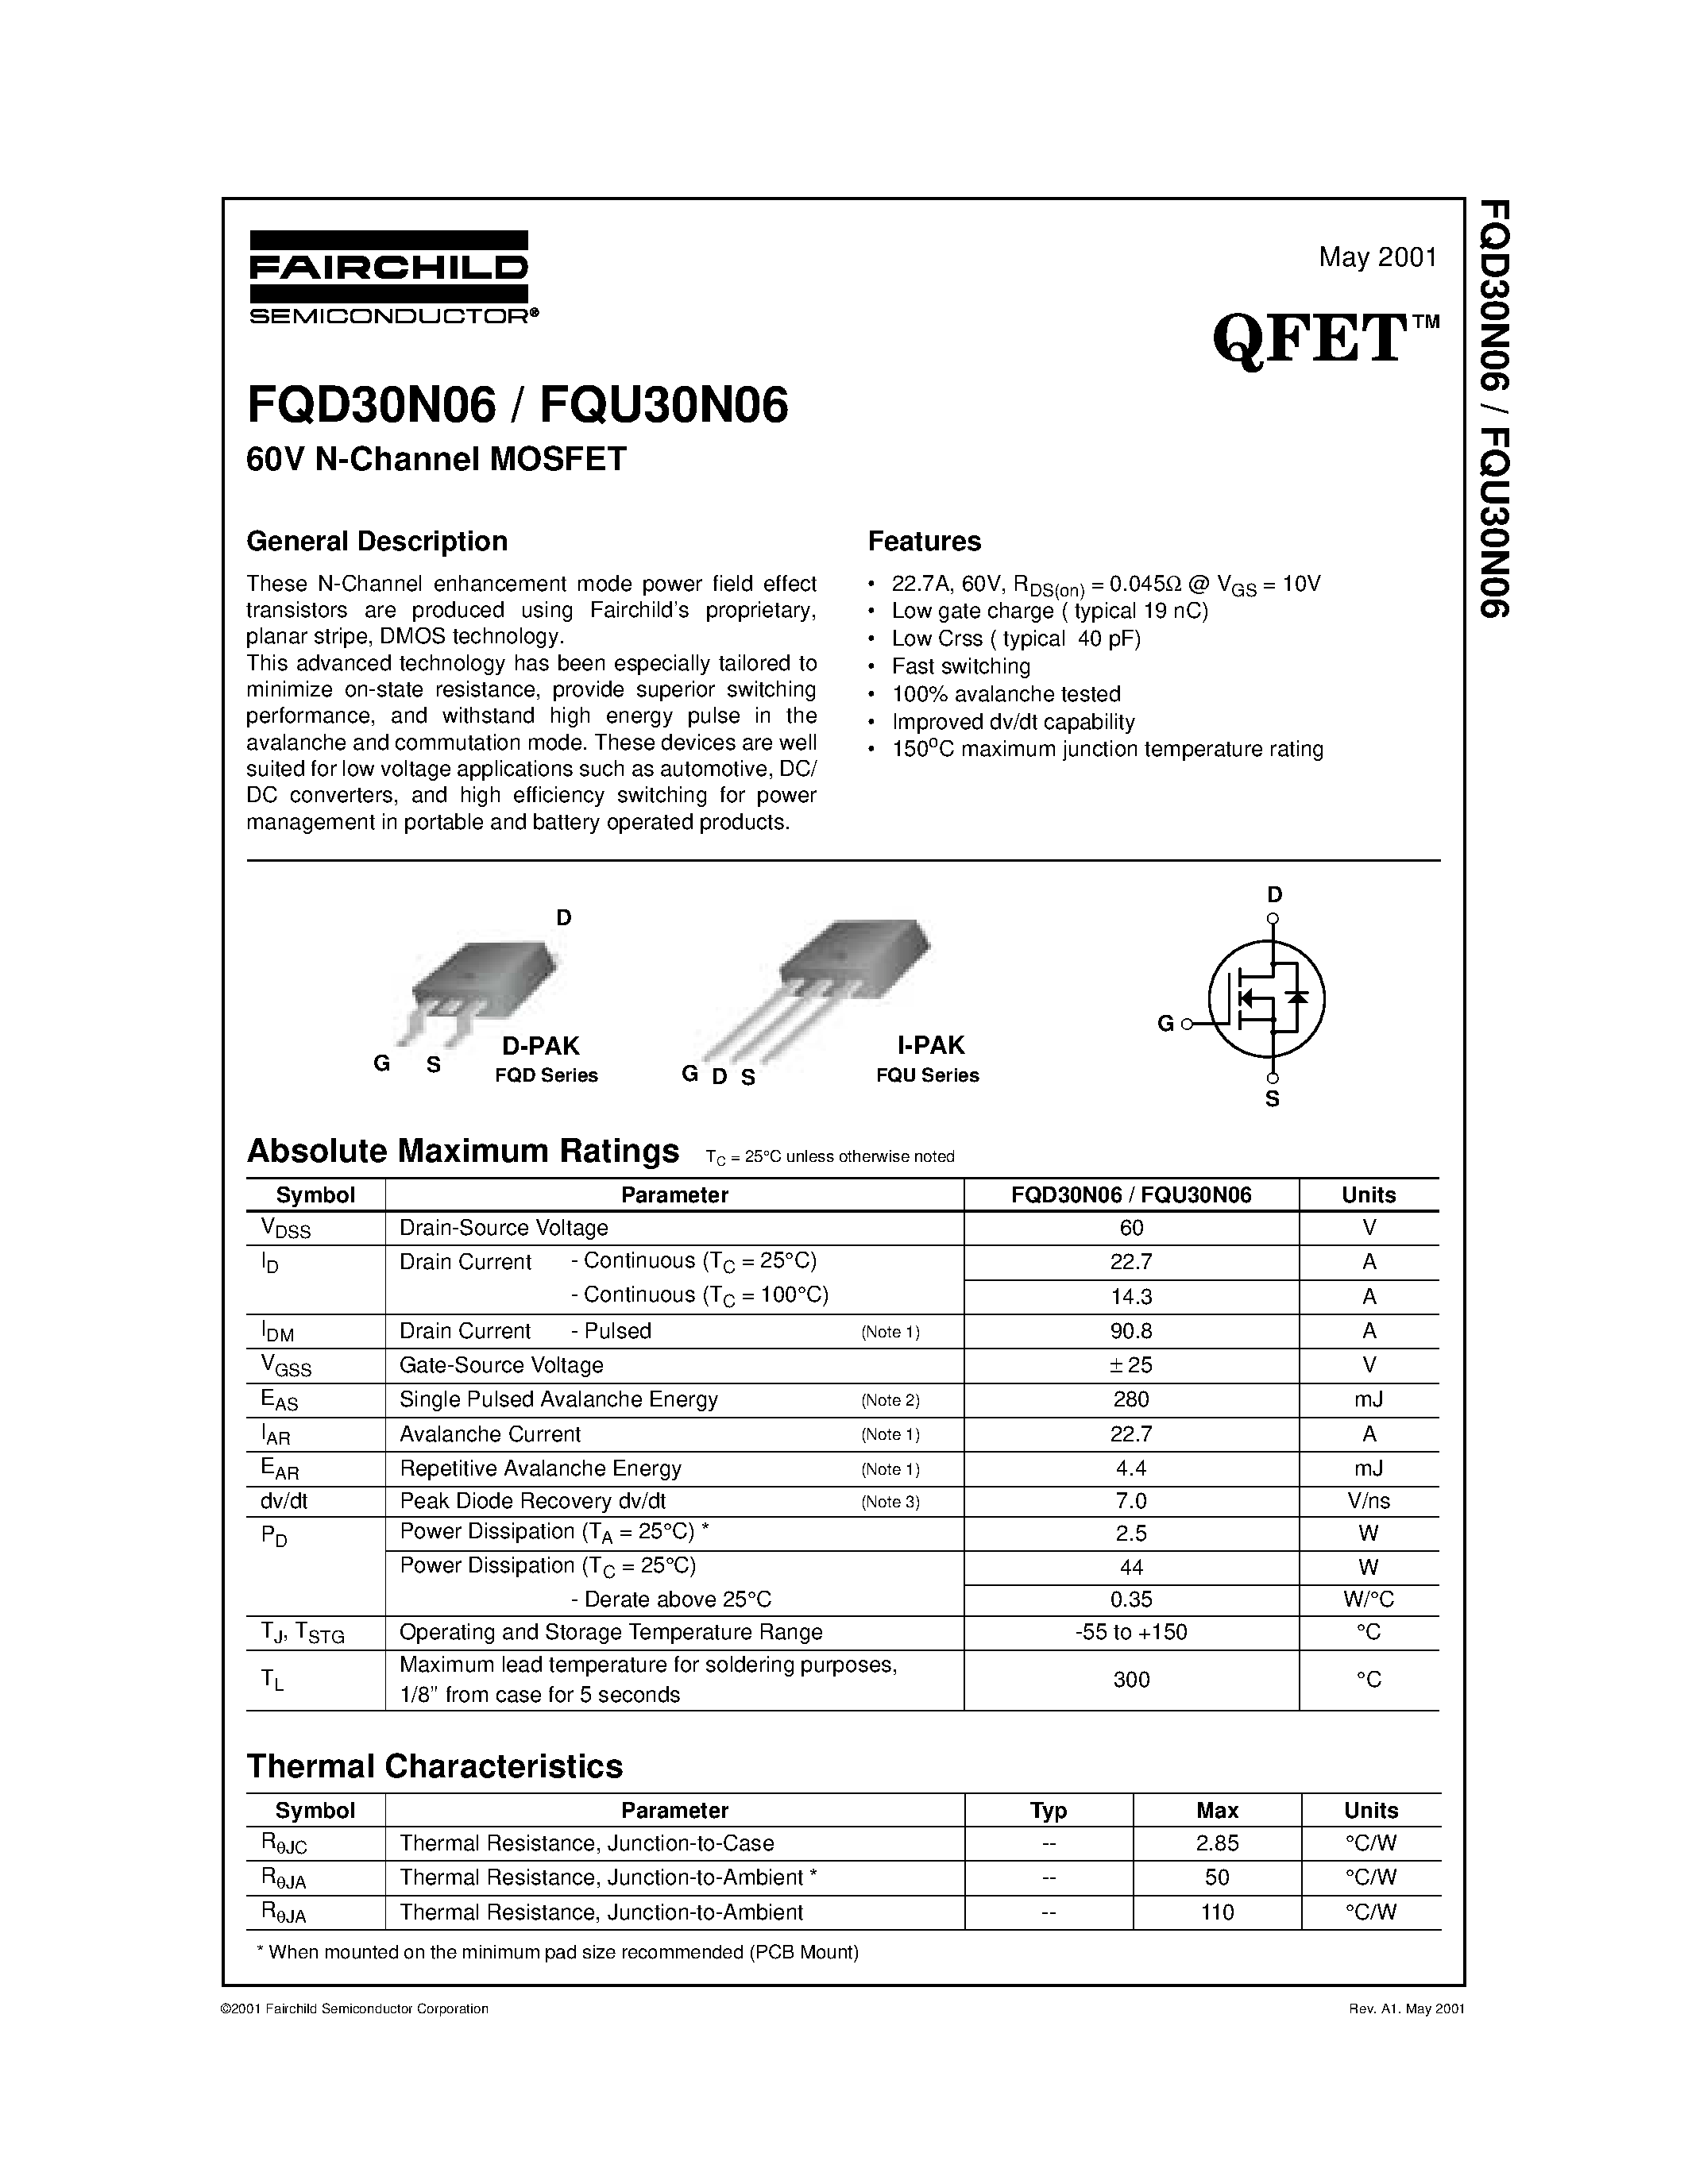 Datasheet FQD30N06 - 60V N-Channel MOSFET page 1